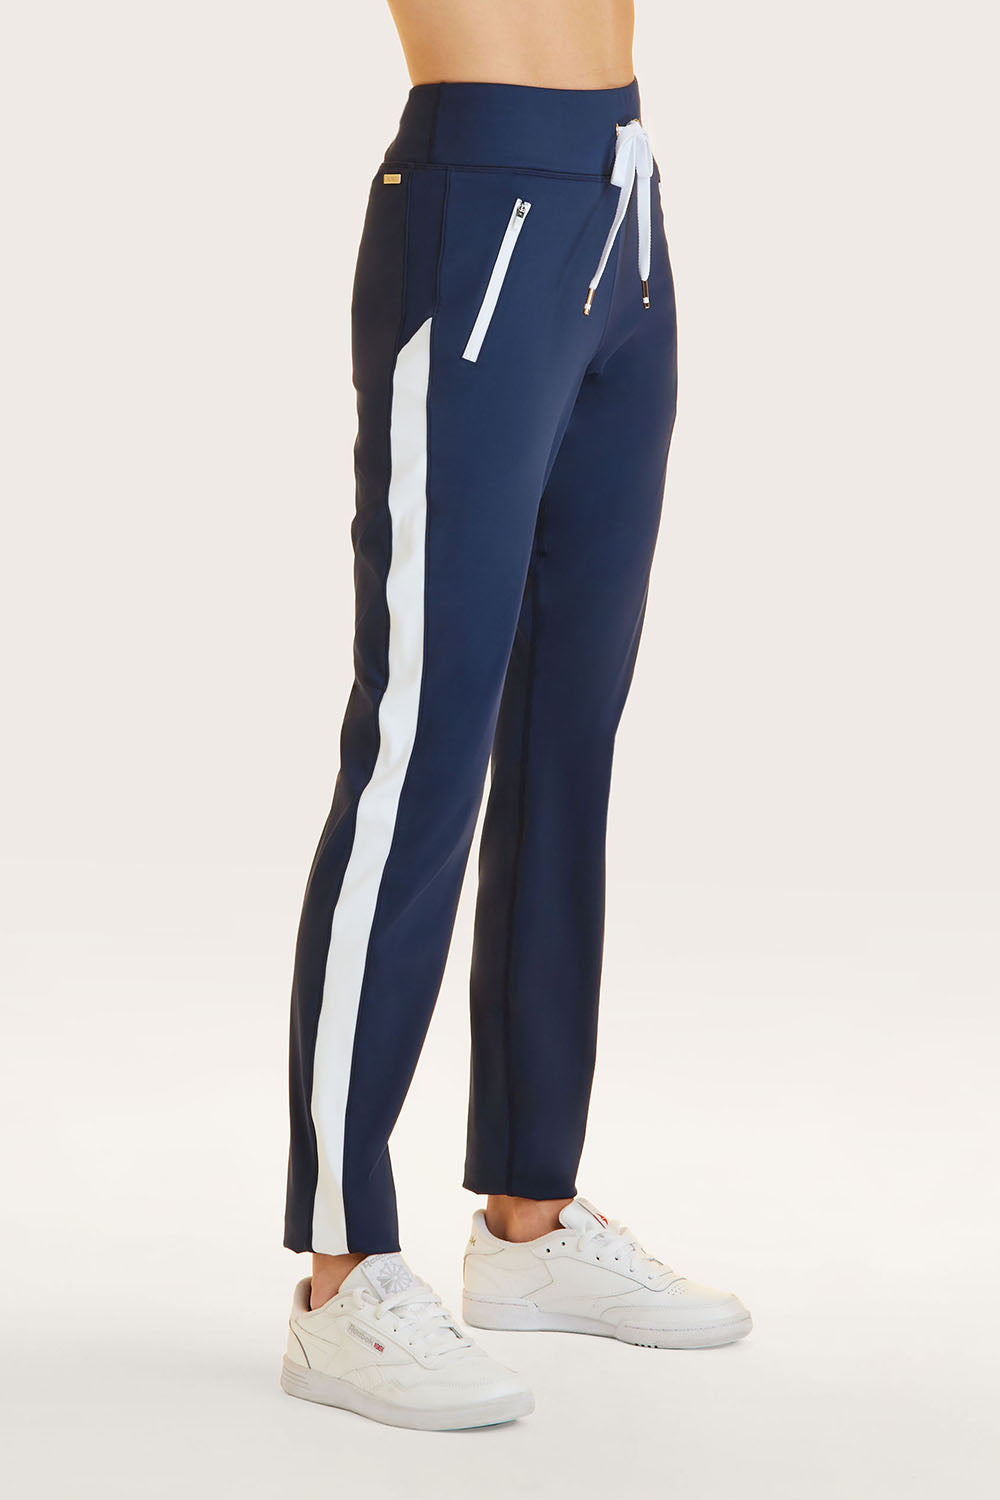 Solid Women Blue Track Pants Price in India - Buy Solid Women Blue Track  Pants online at Shopsy.in